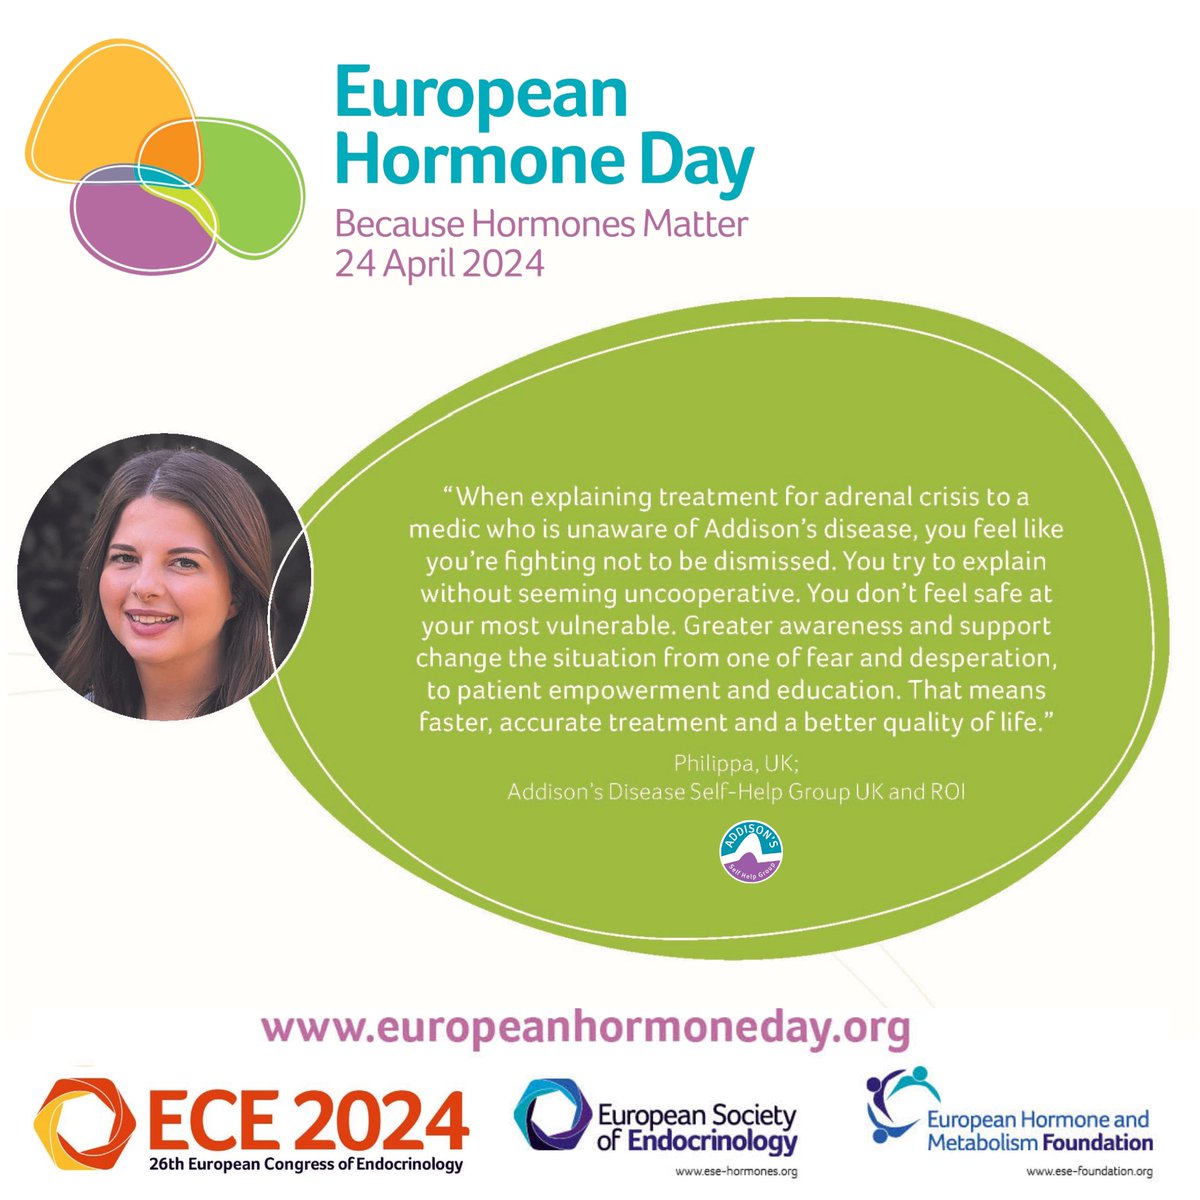 Over 400 rare diseases are linked to the endocrine system. Diagnosis can be slow & for many, like Addison's & adrenal insufficiency, there’s no cure. We're joining @ESEndocrinology to raise awareness on #EuropeanHormoneDay. Read #BecauseHormonesMatter➡️ loom.ly/4kXEmKQ